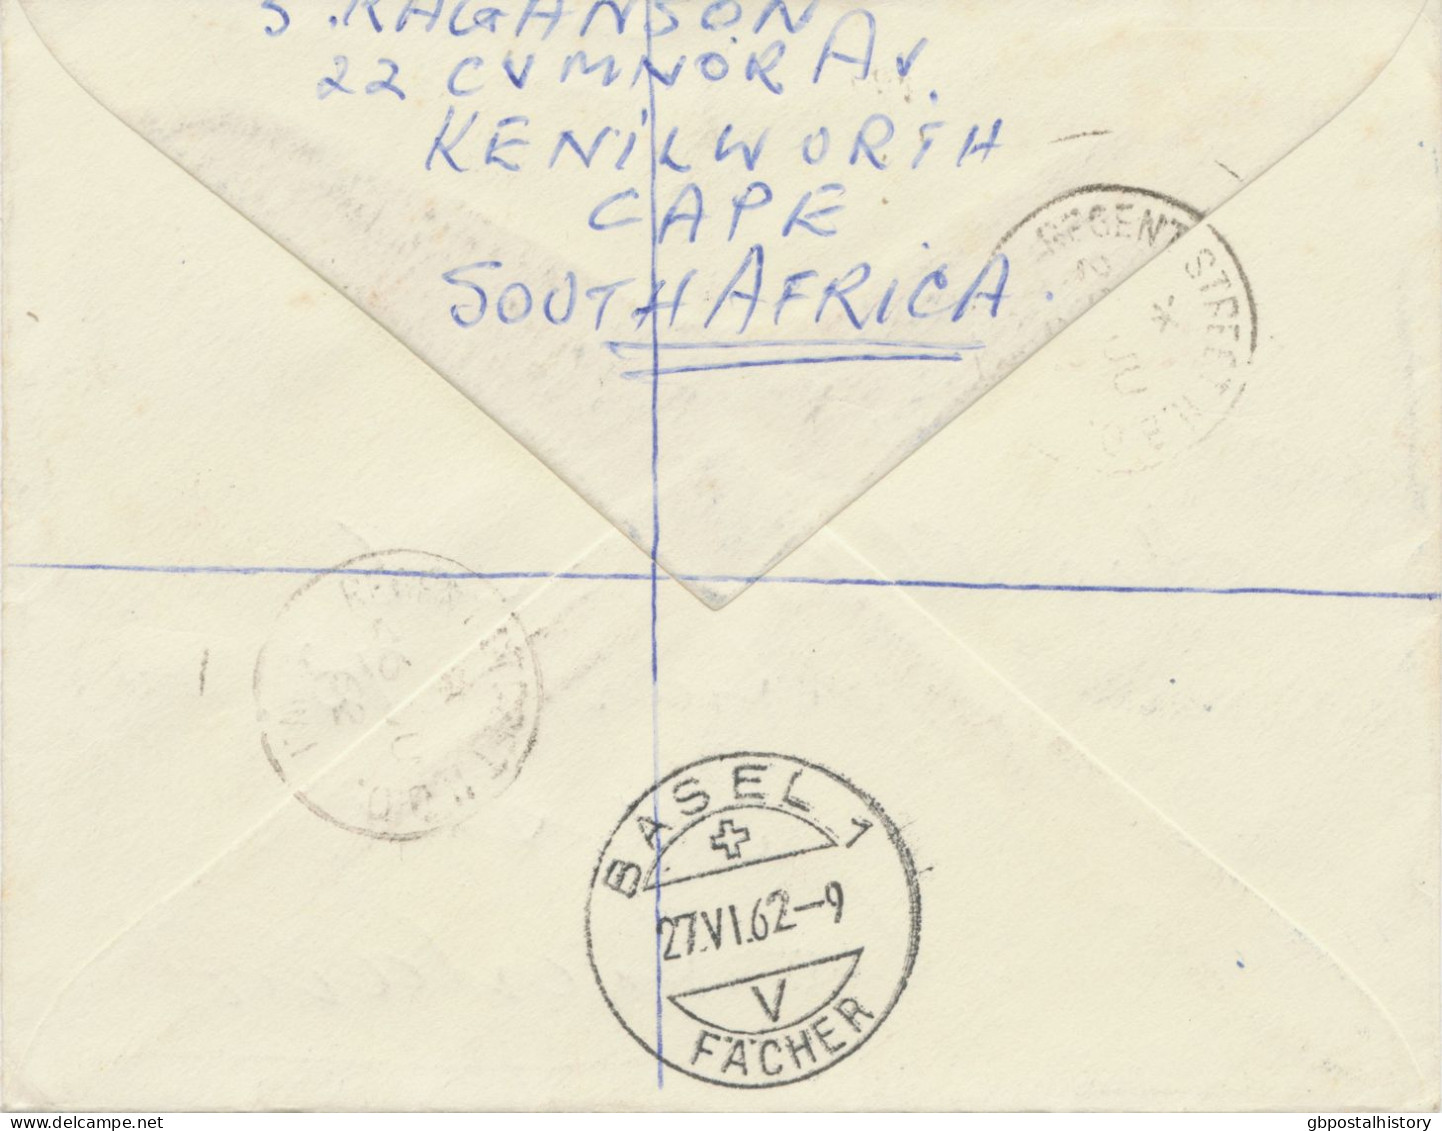 GB 1962, QEII Wilding 1sh (2x) Rare Multiple Postage On Registered Air Mail Cover With R-Label „London, S.W.88“ To BASEL - Entiers Postaux